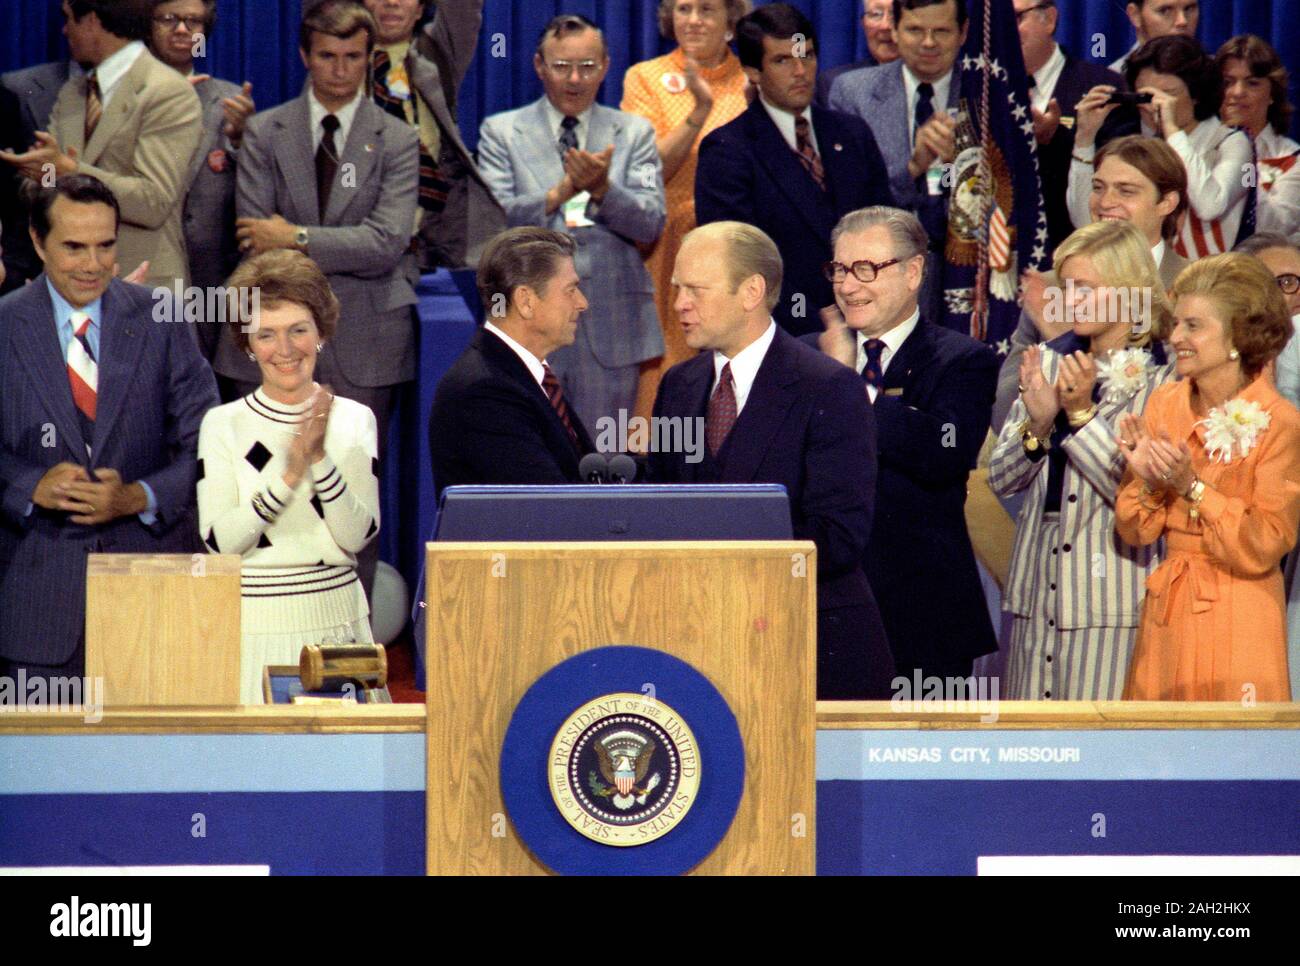 President Gerald Ford, as the Republican nominee, shakes hands with nomination foe Ronald Reagan on the closing night of the 1976 Republican National Convention. Vice-Presidential Candidate Bob Dole is on the far left, then Nancy Reagan, Governor Ronald Reagan is at the center shaking hands with President Gerald Ford, Vice-President Nelson Rockefeller is just to the right of Ford, followed by Susan Ford and First Lady Betty Ford. August 19, 1976 Stock Photo